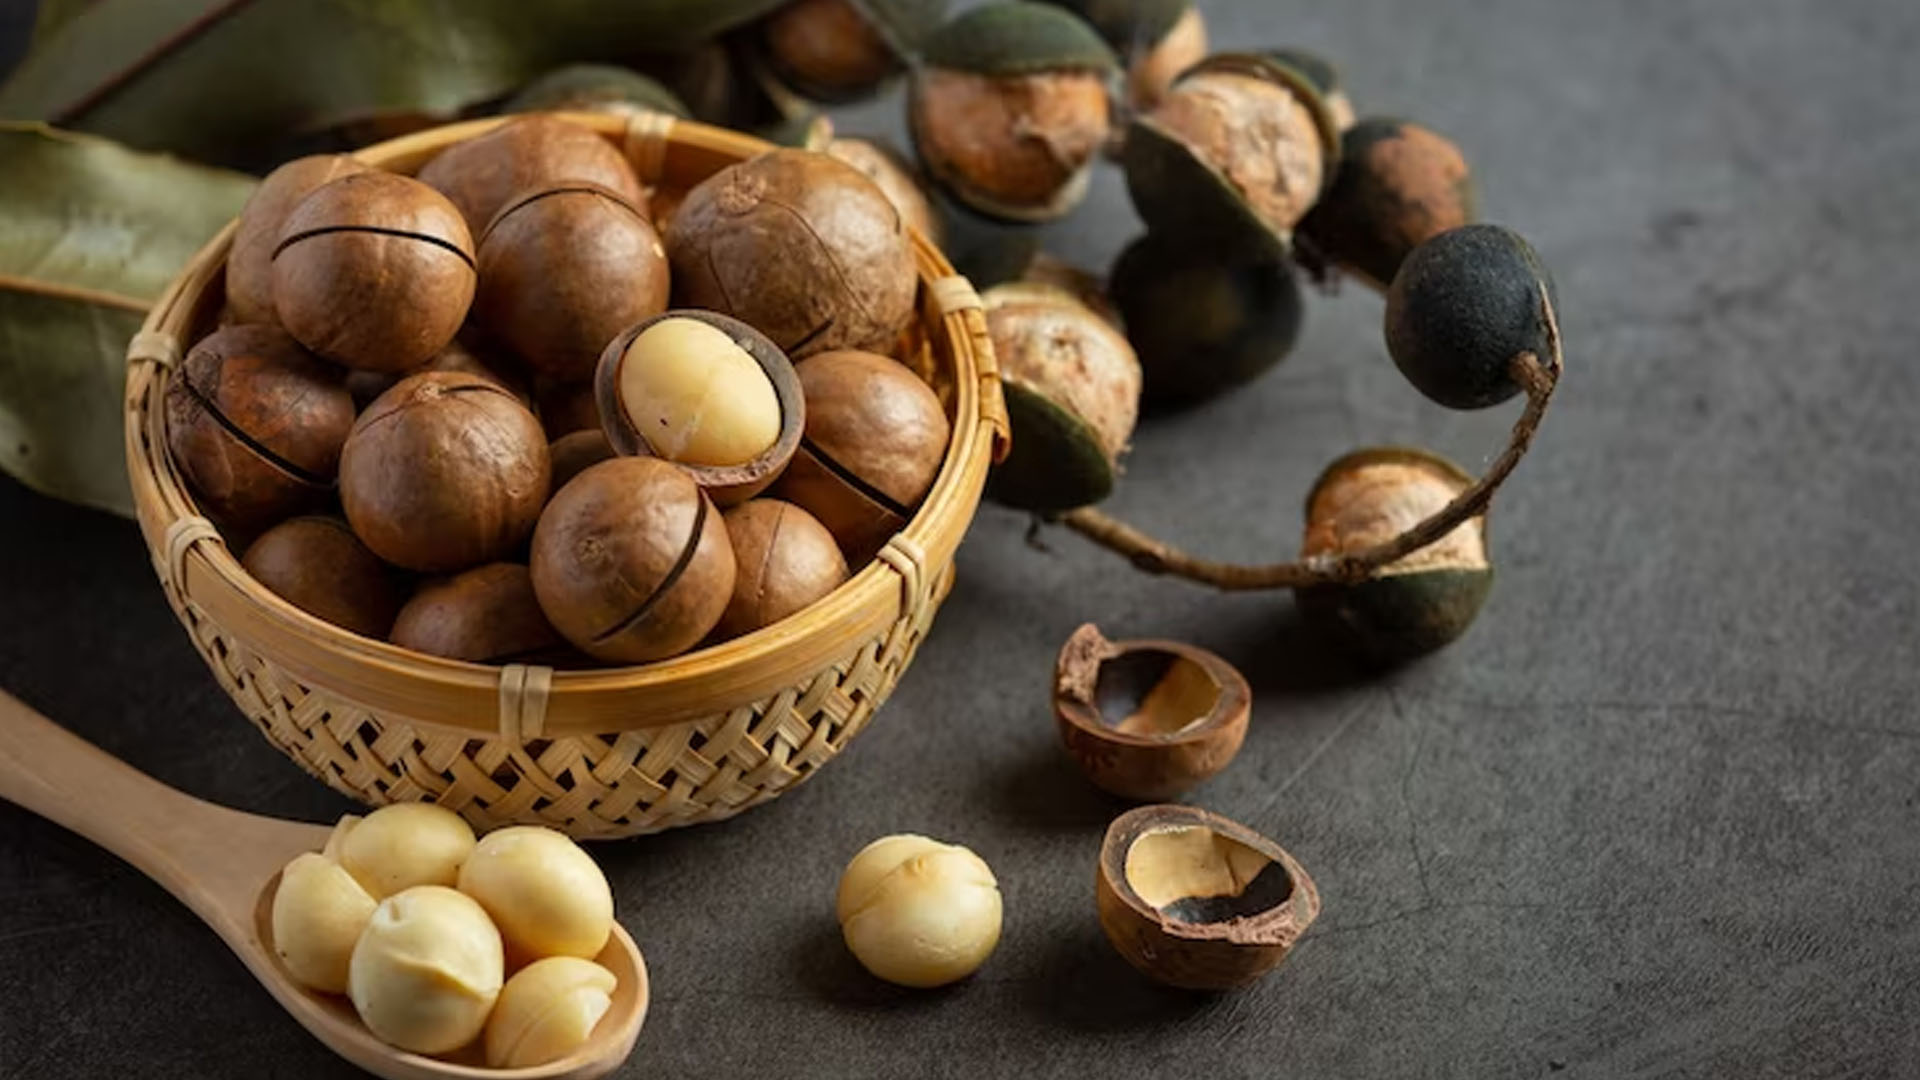 What Are Macadamia Nuts Health Benefits?